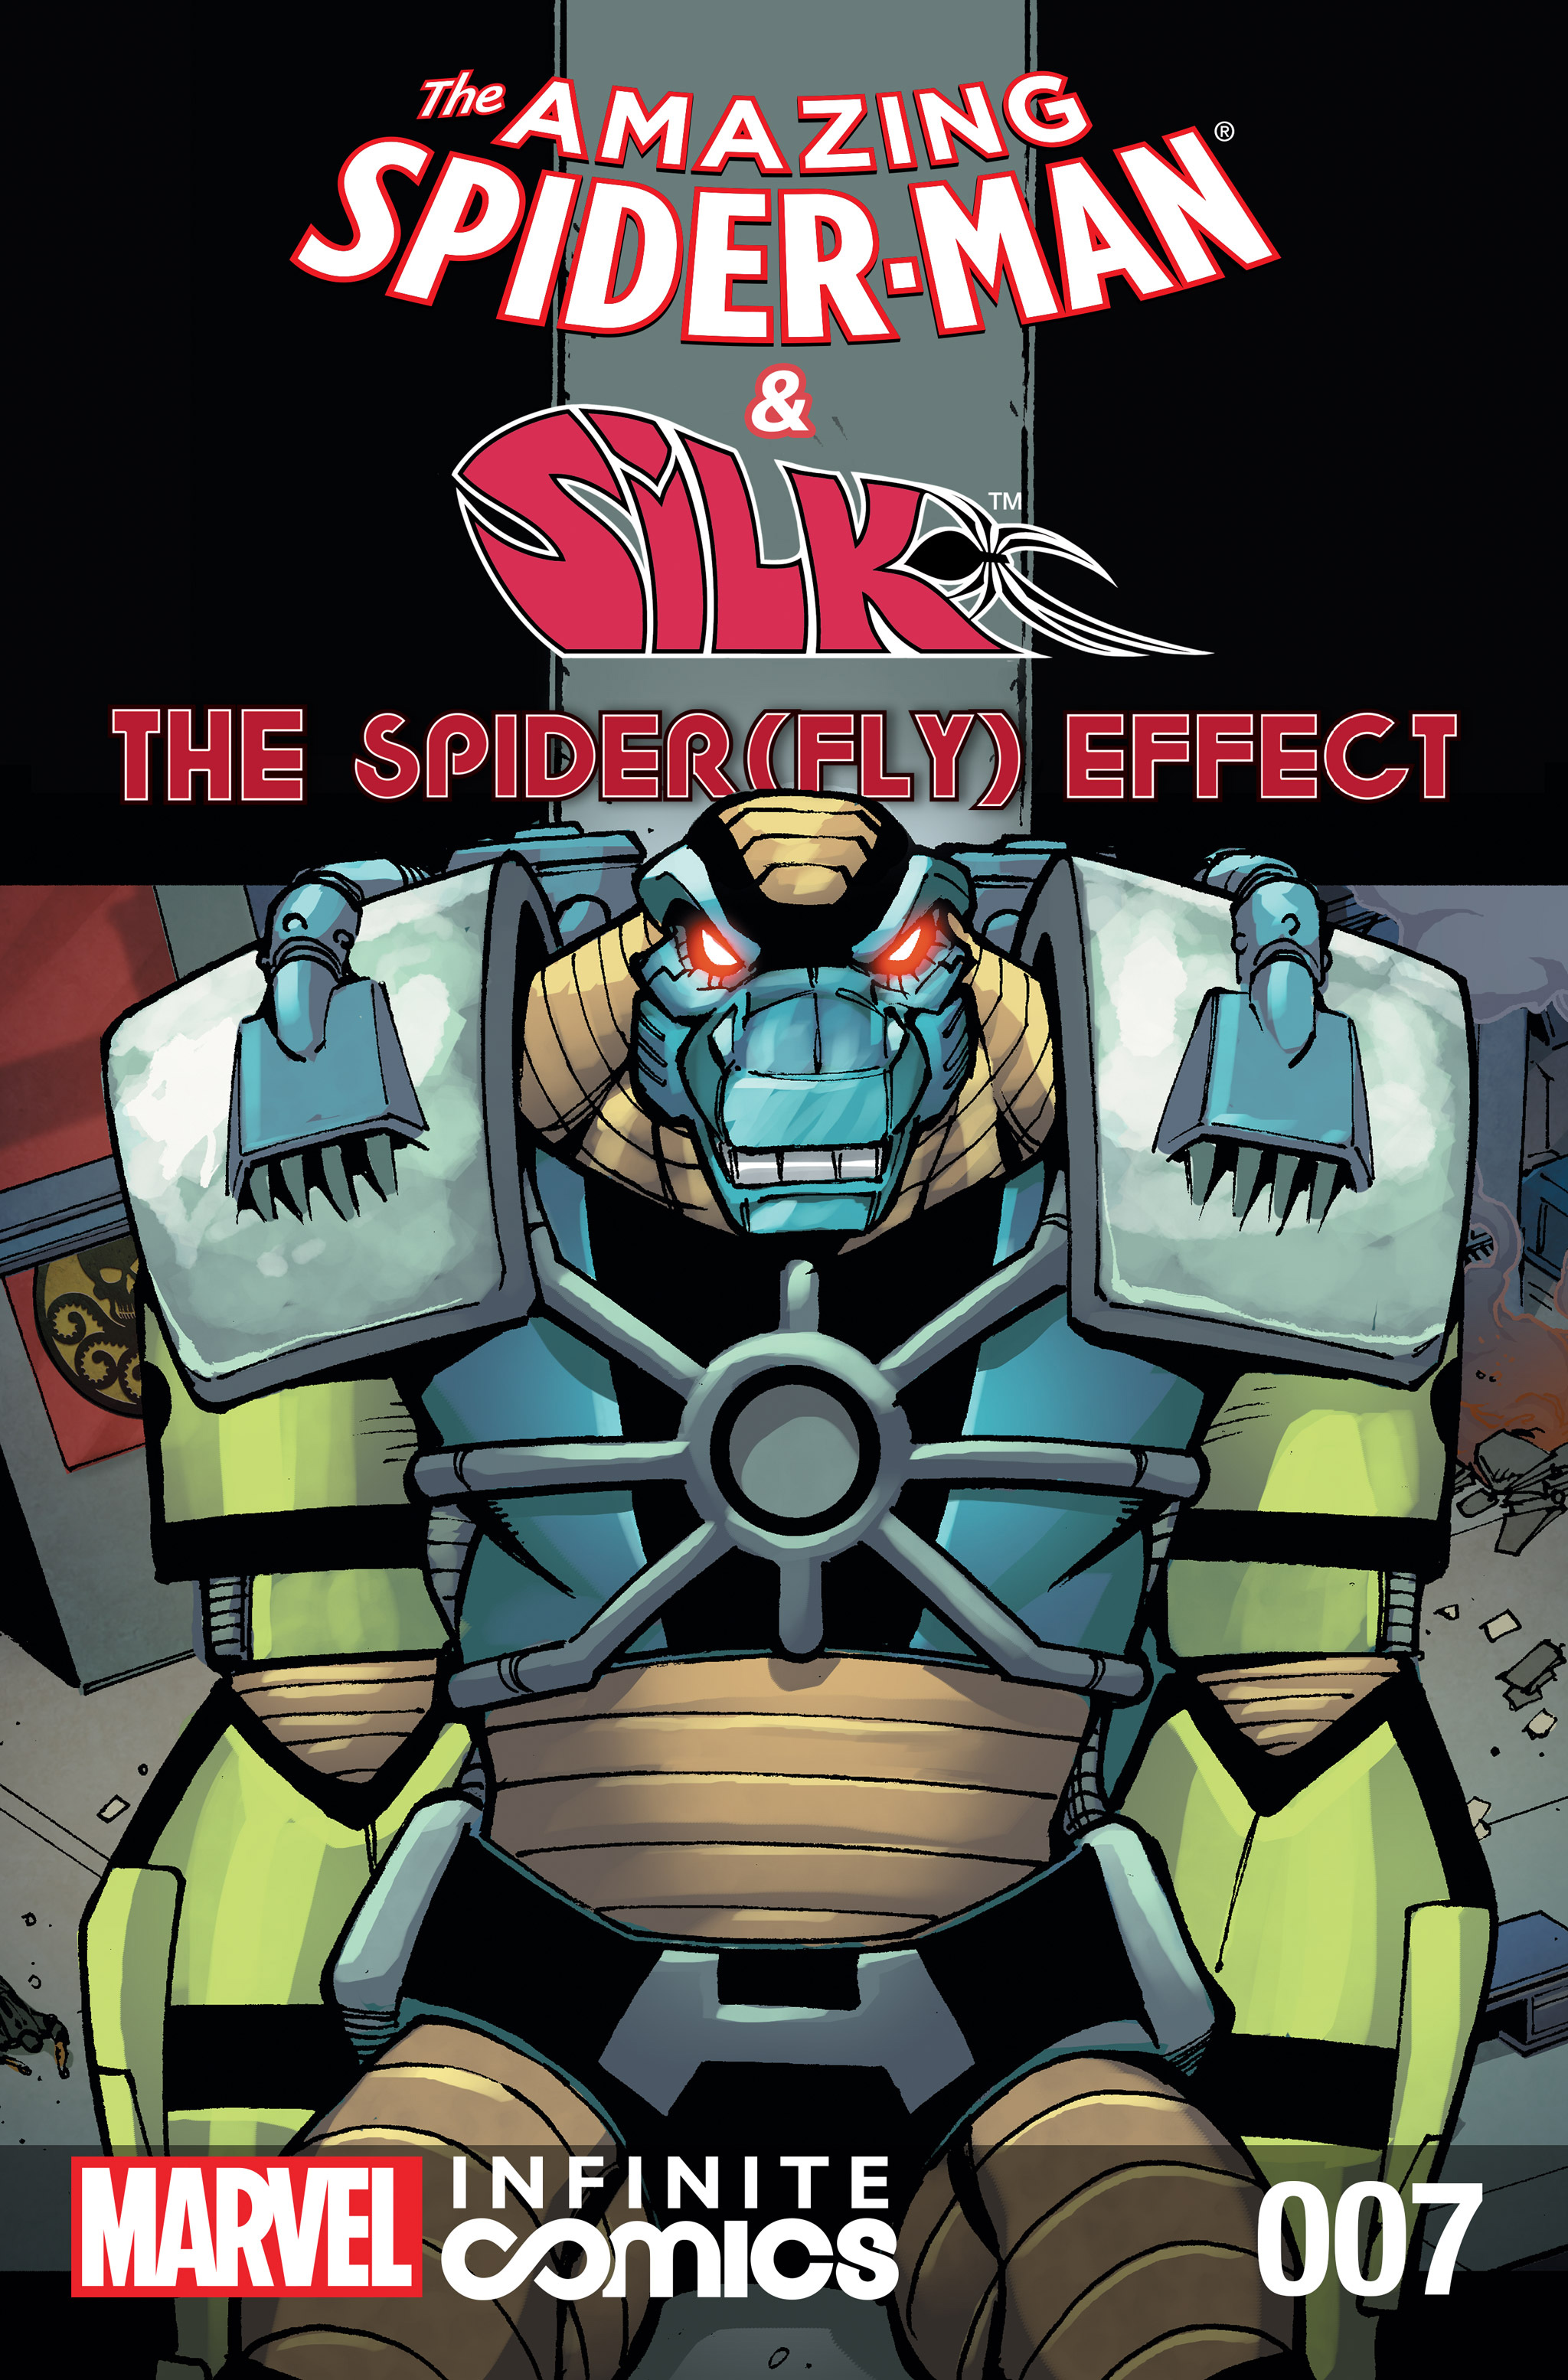 Read online The Amazing Spider-Man & Silk: The Spider(fly) Effect (Infinite Comics) comic -  Issue #7 - 1